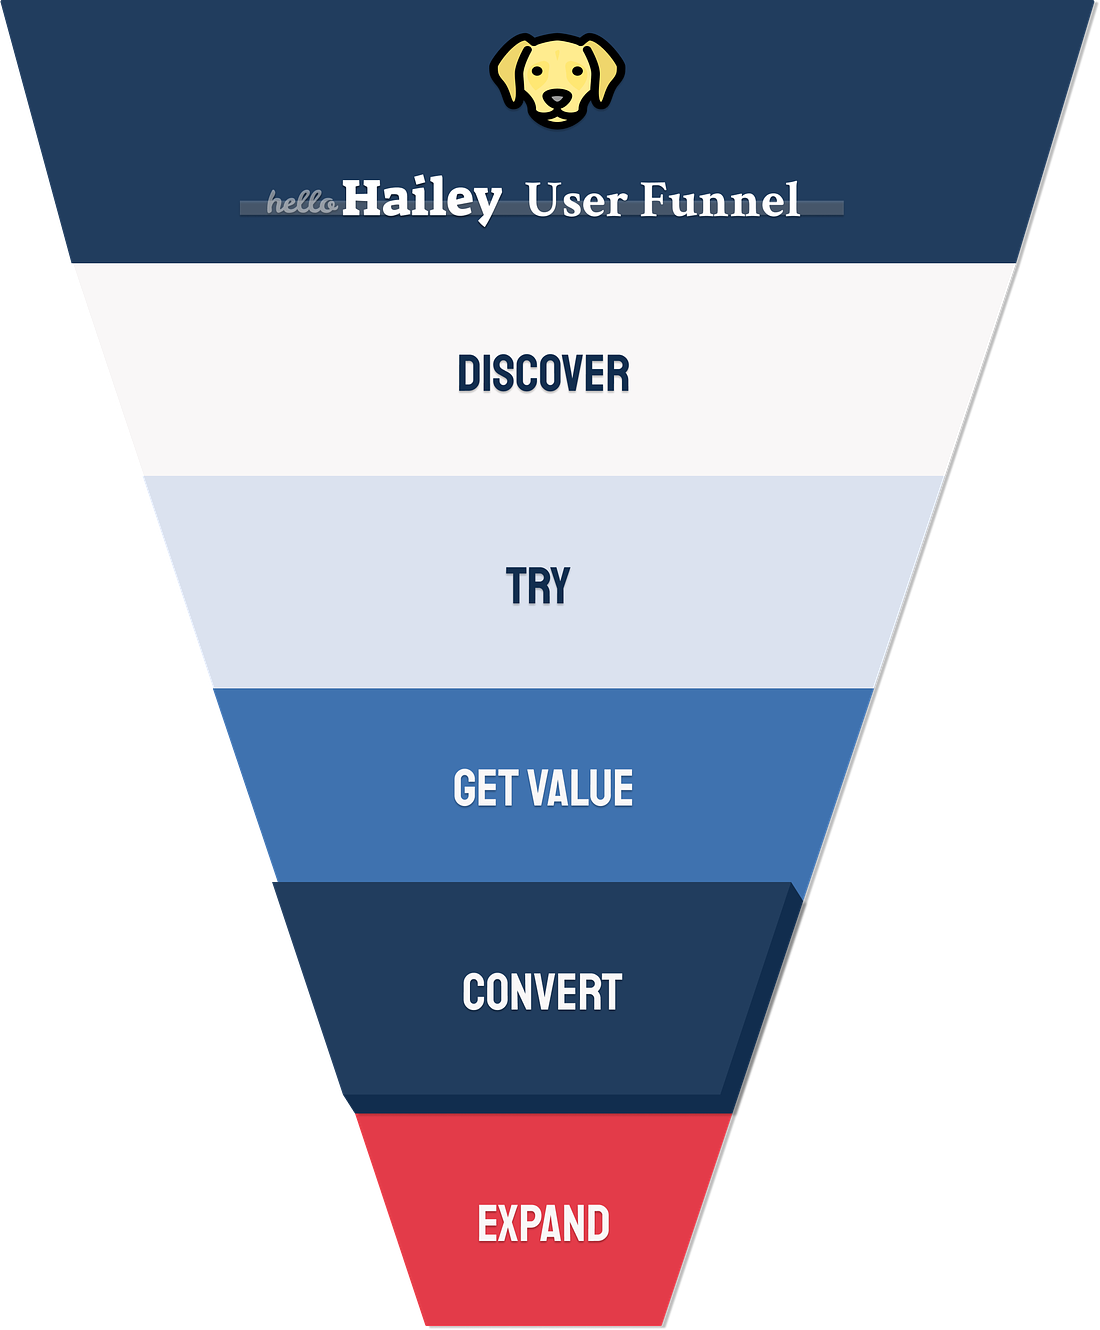 HelloHailey user acquisition funnel